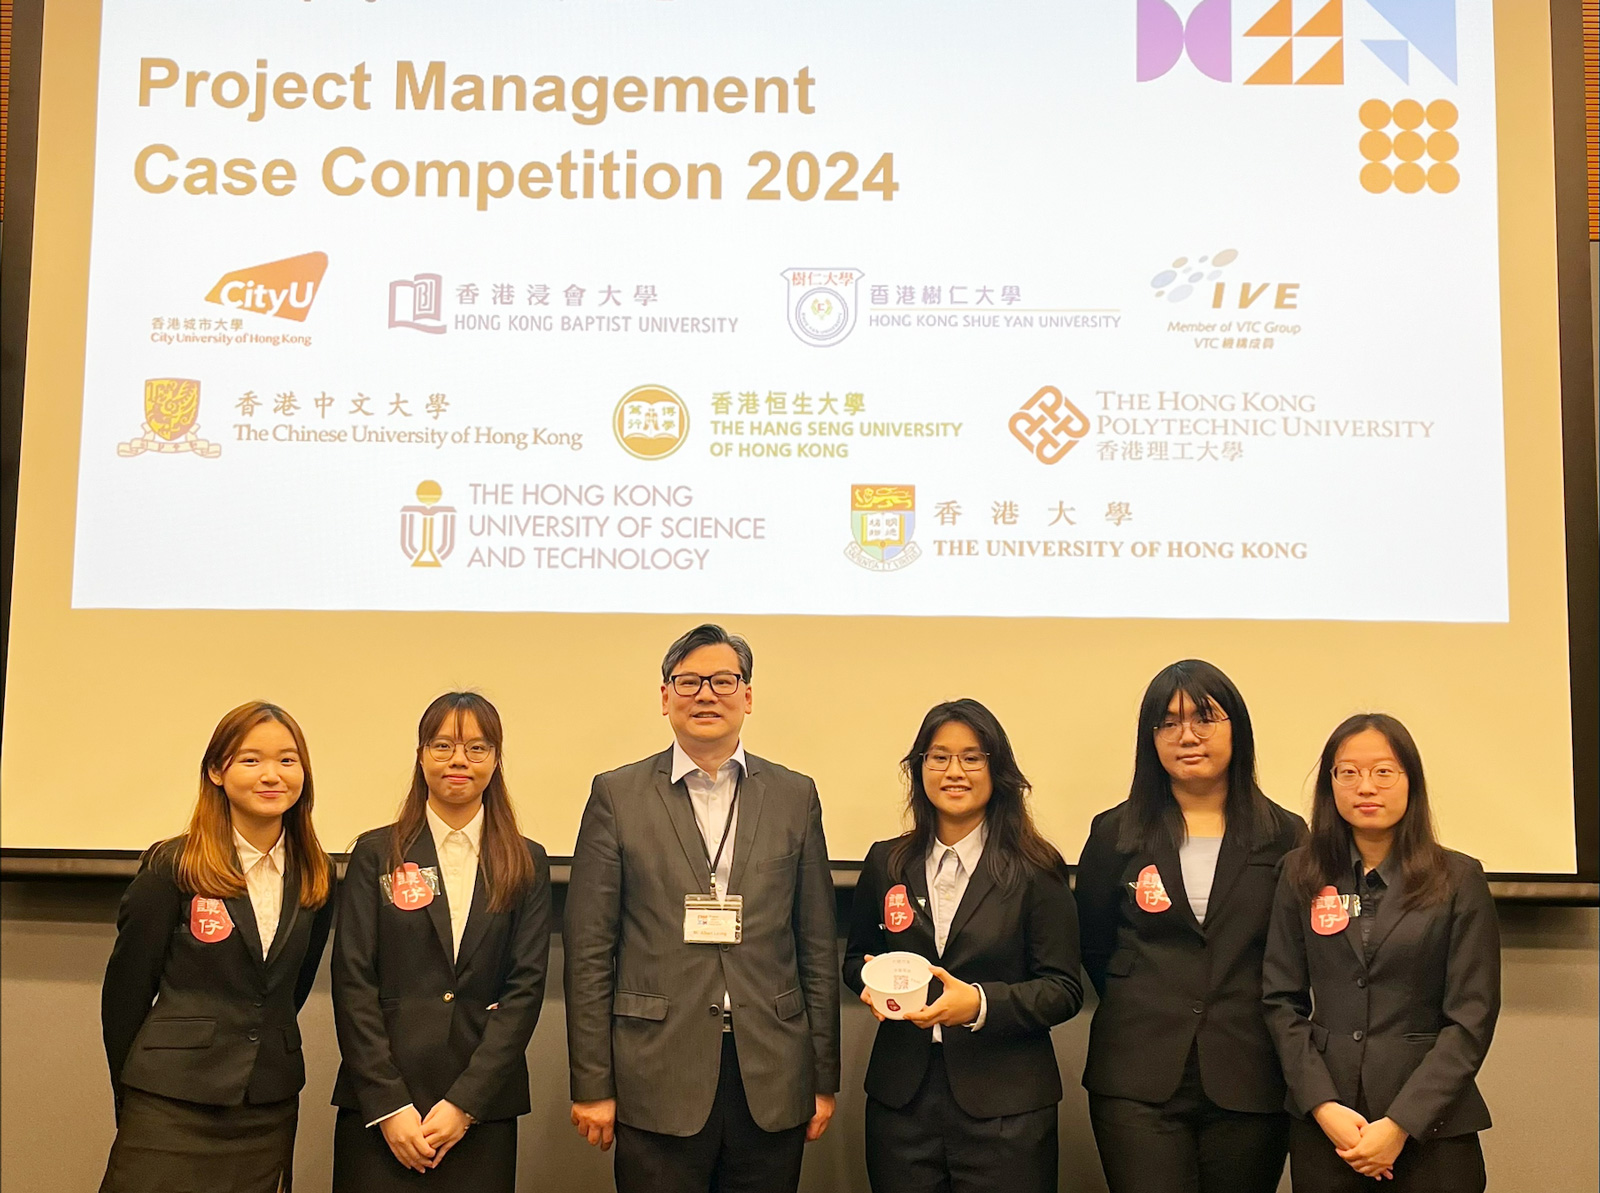 (From left) Cheuk-yi Lau, Cecila Lau, Mr Albert Leung (VP Awards of PMI Hong Kong), Amme Woo, Queenie Wong and Hung-ying Wong